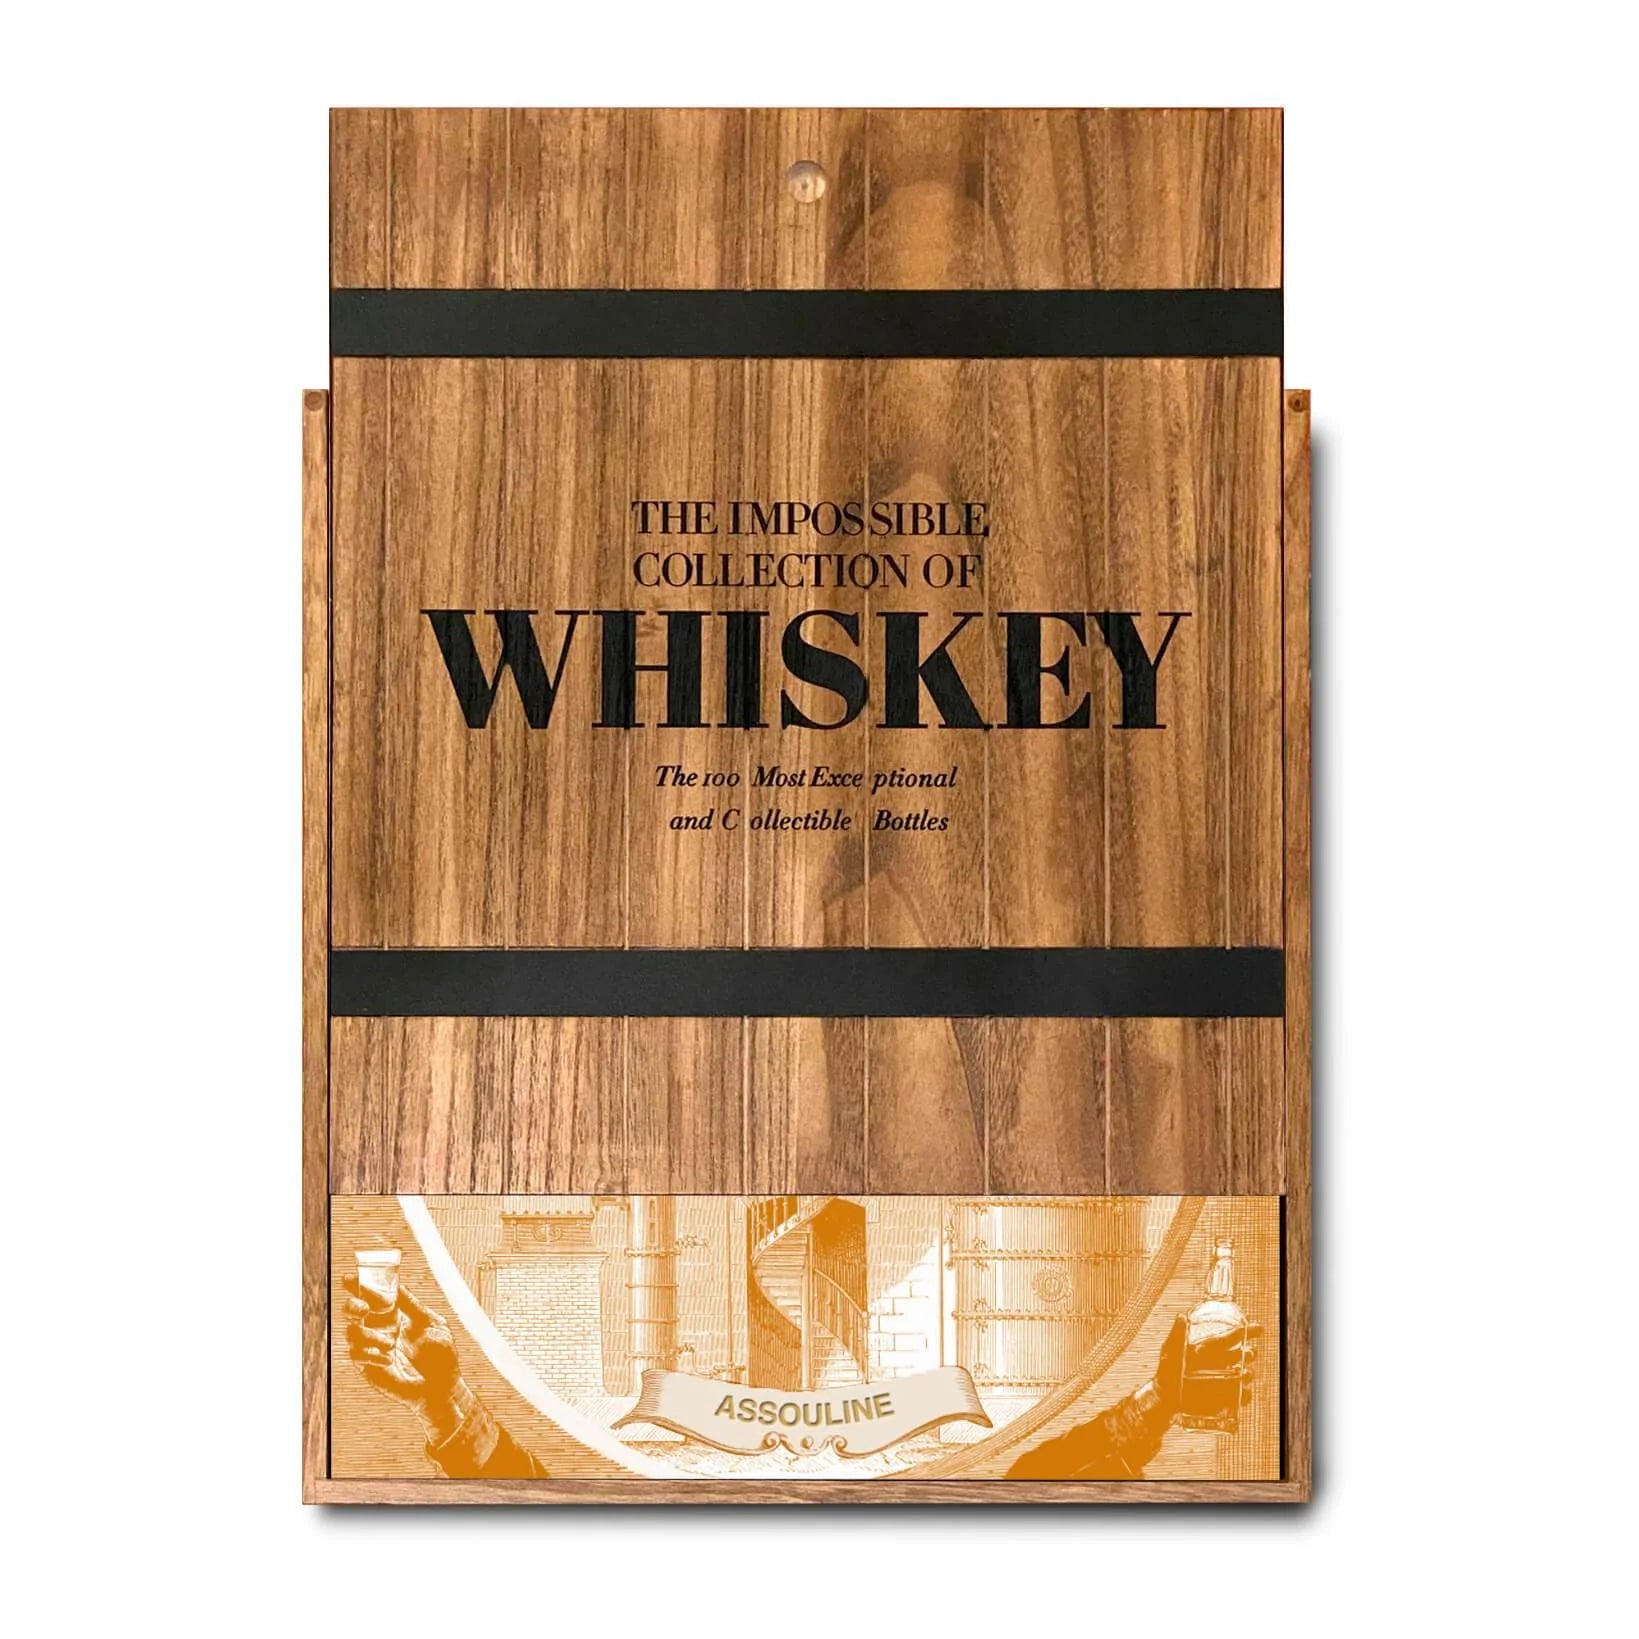 LIVRE THE IMPOSSIBLE COLLECTION OF WHISKY